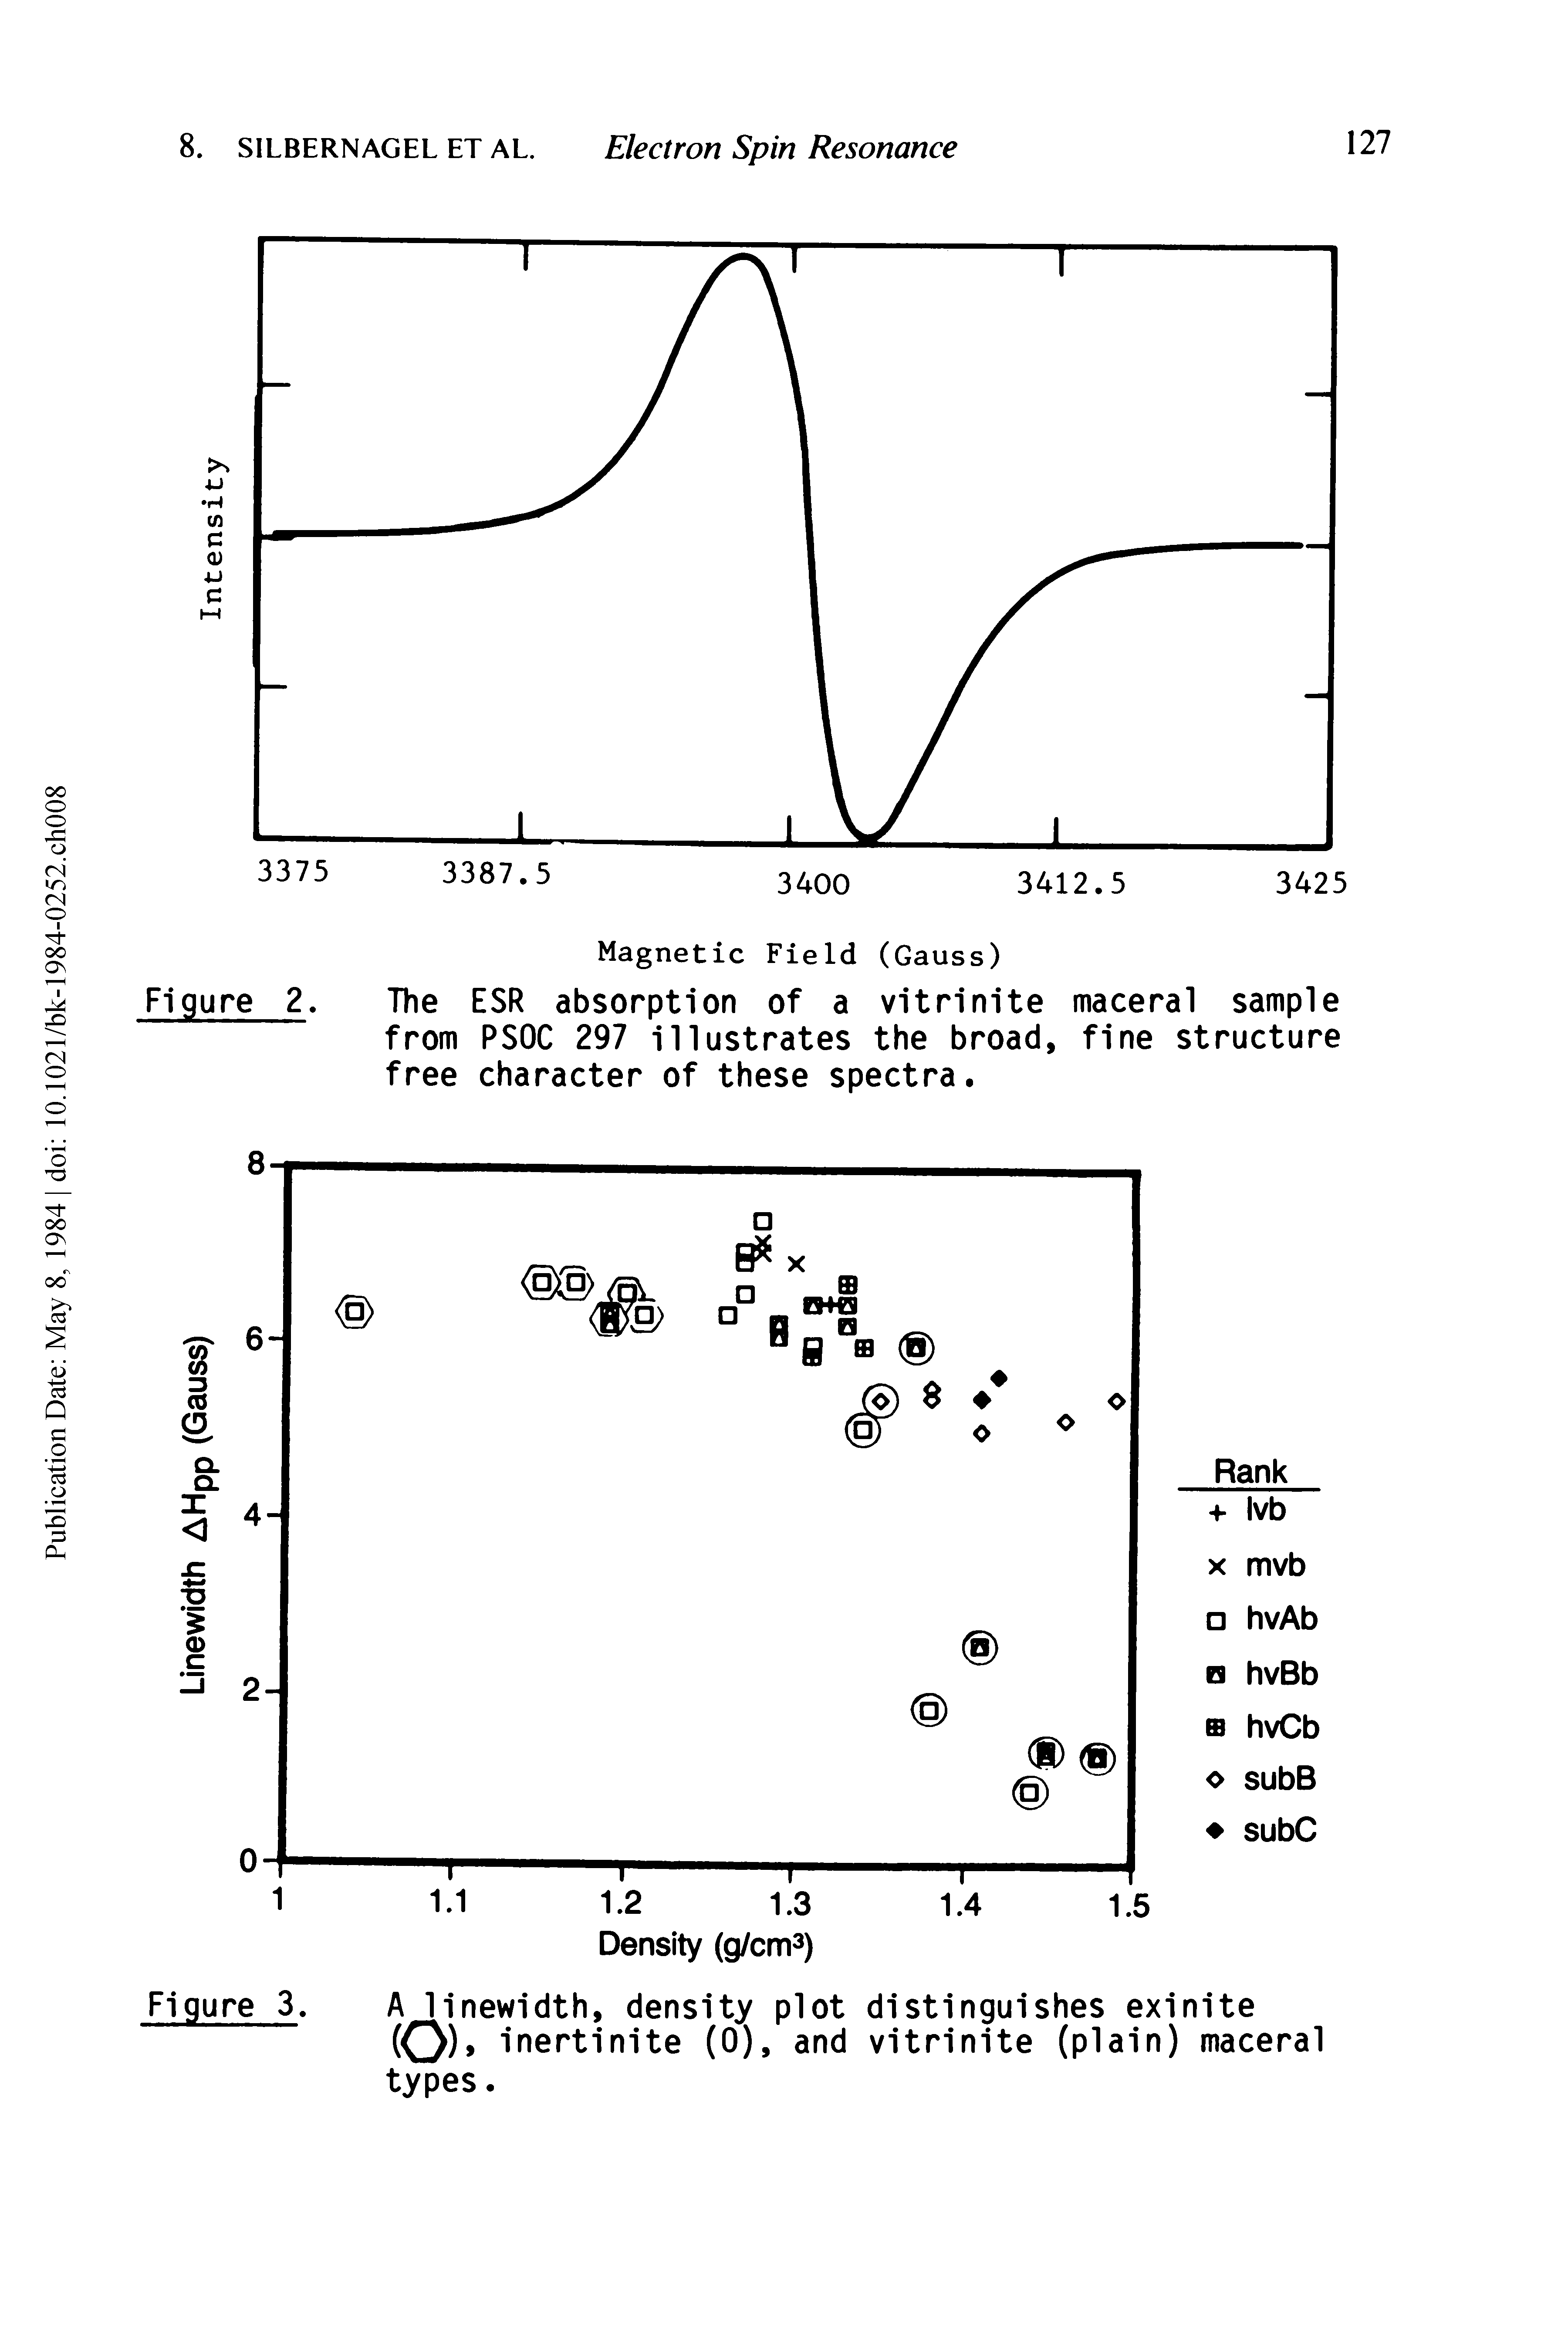 Figure 2. The ESR absorption of a vitrinite maceral sample from PSOC 297 illustrates the broad, fine structure free character of these spectra.